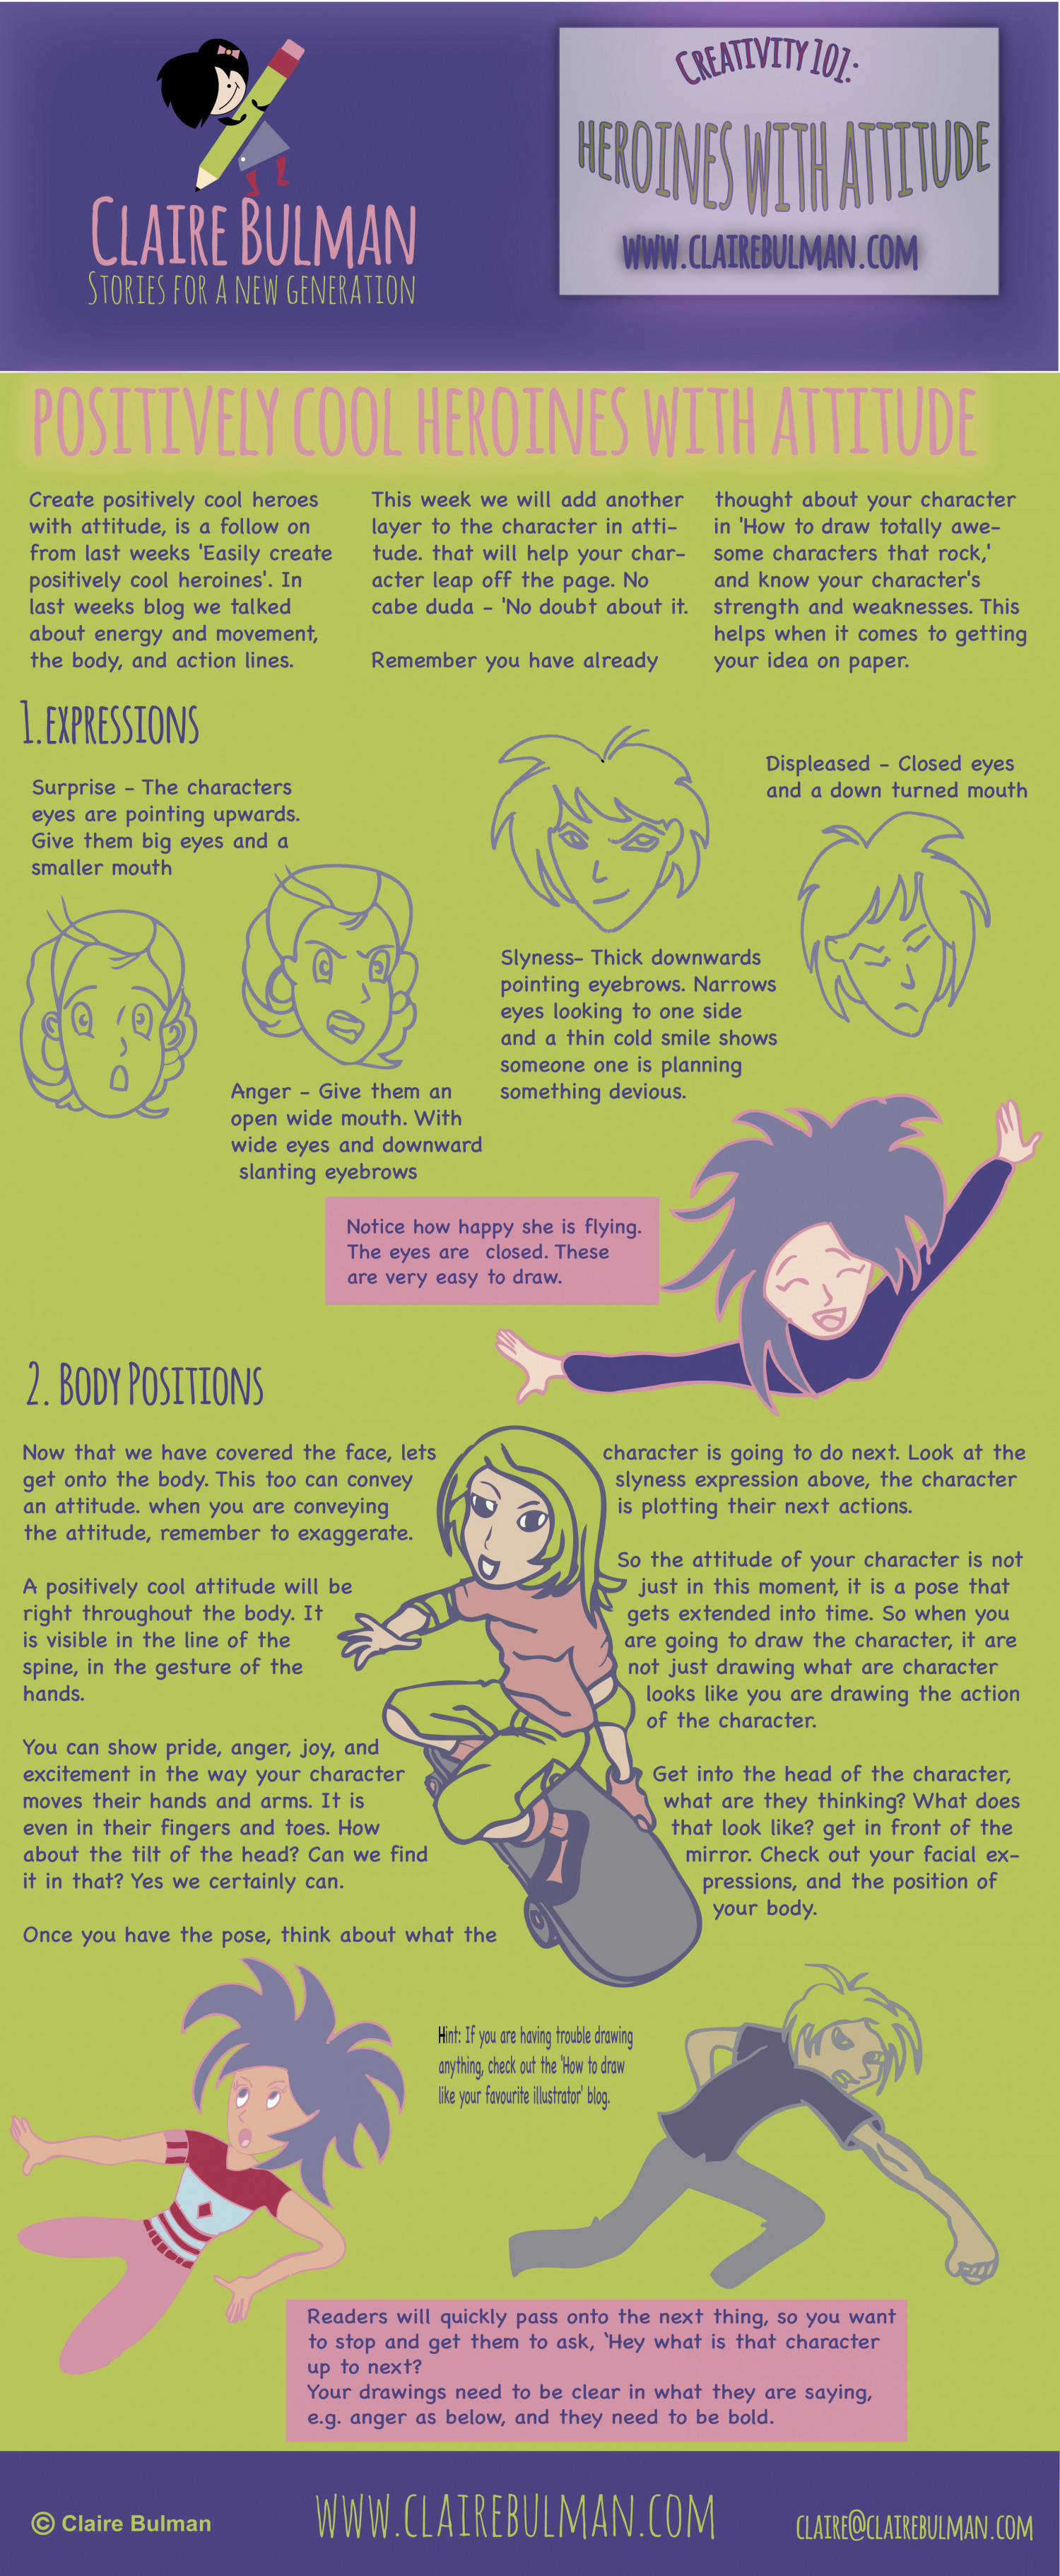 Easily create positively cool heroines with attitude Infographic